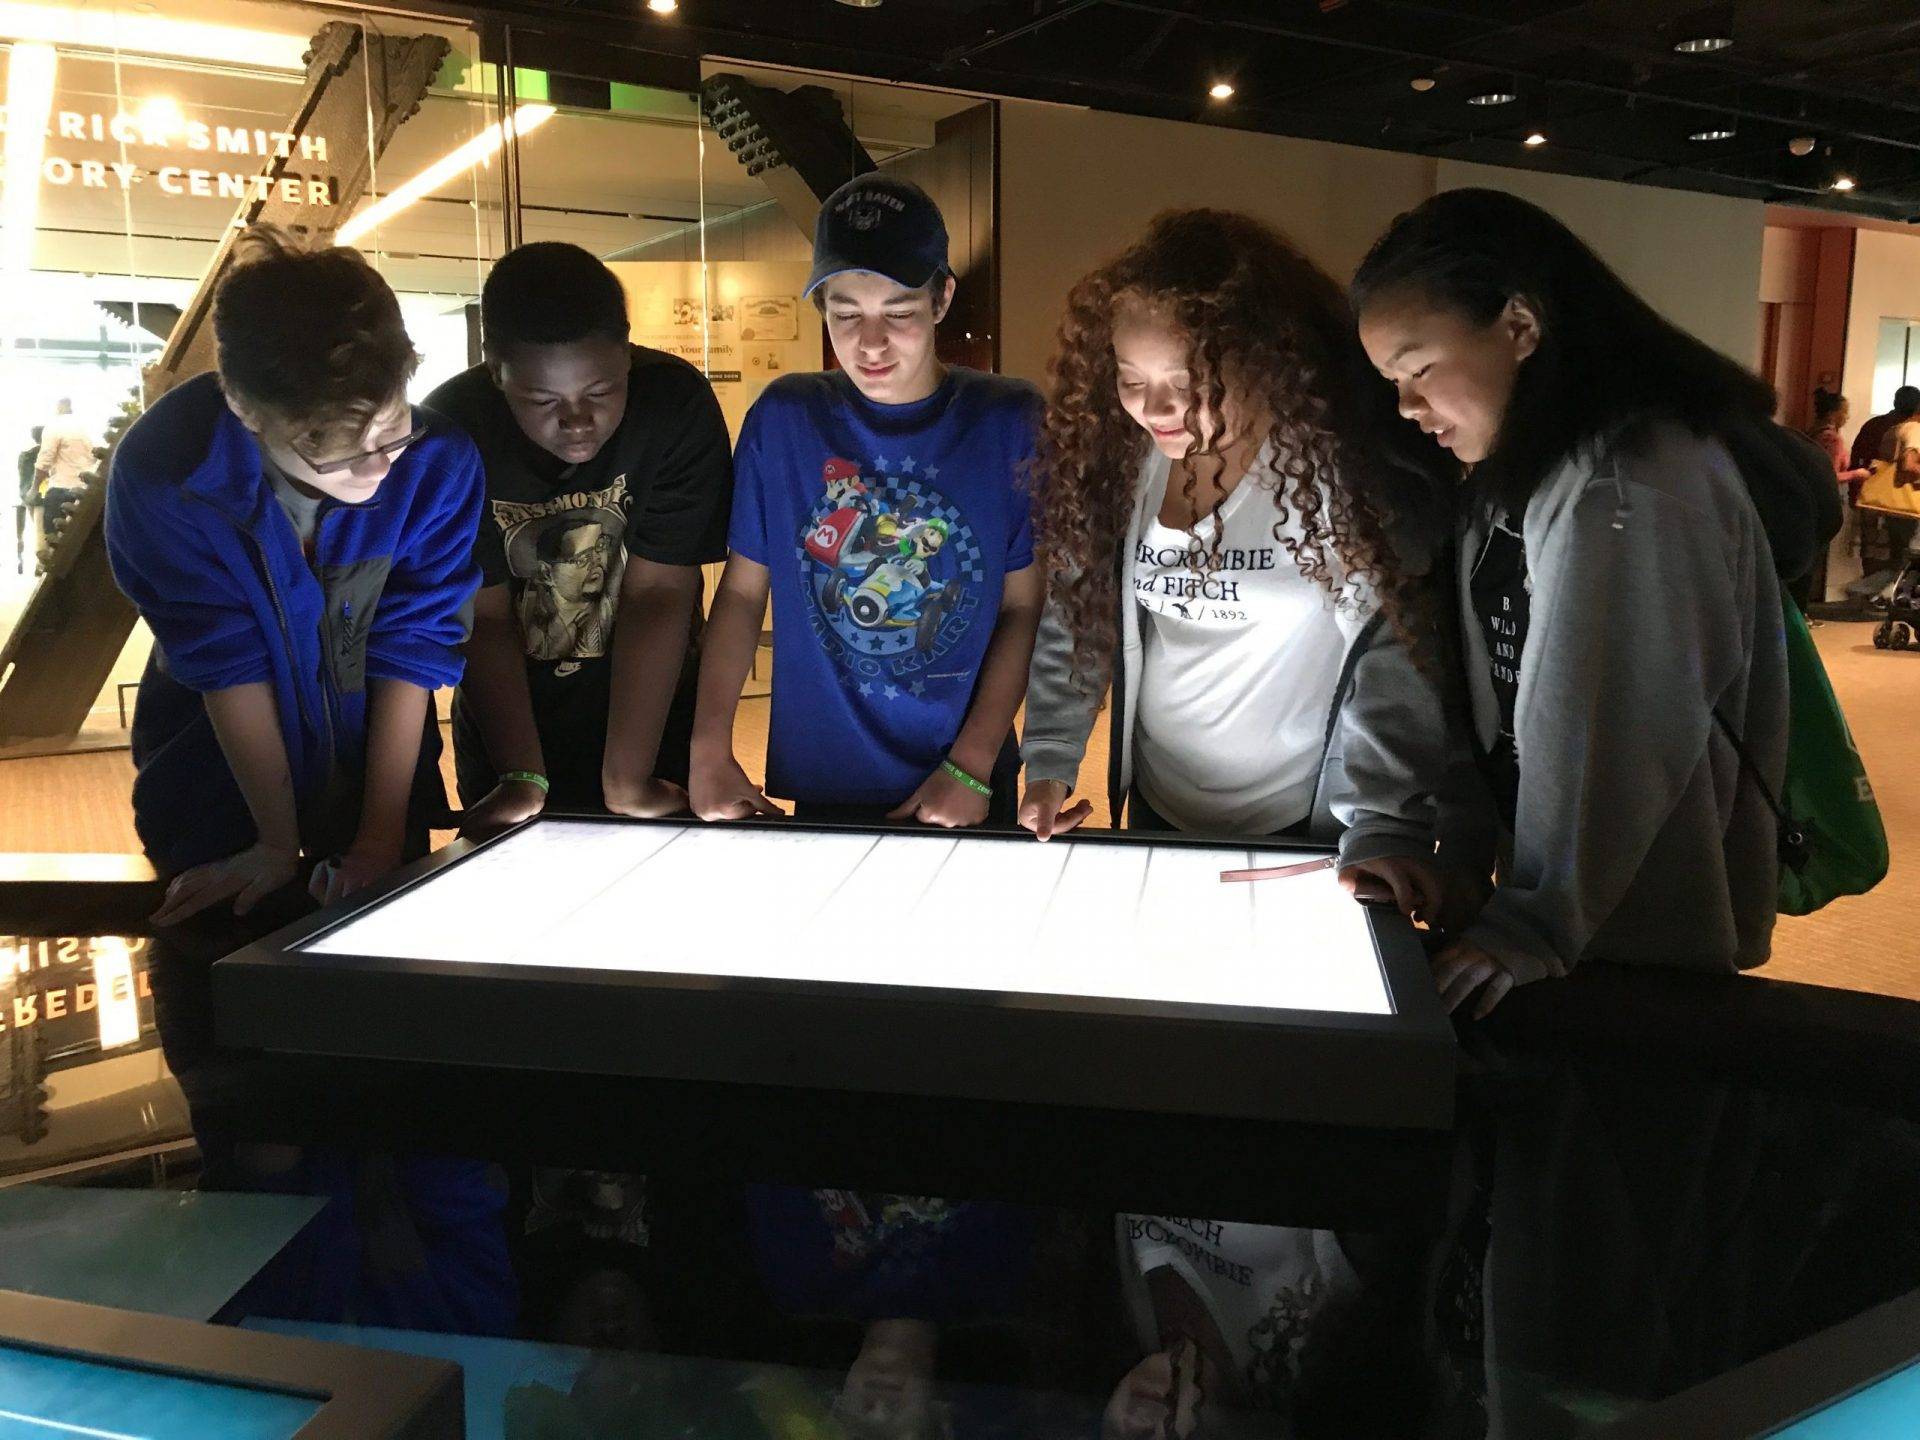 Students around a interactive screen at a museum in DC